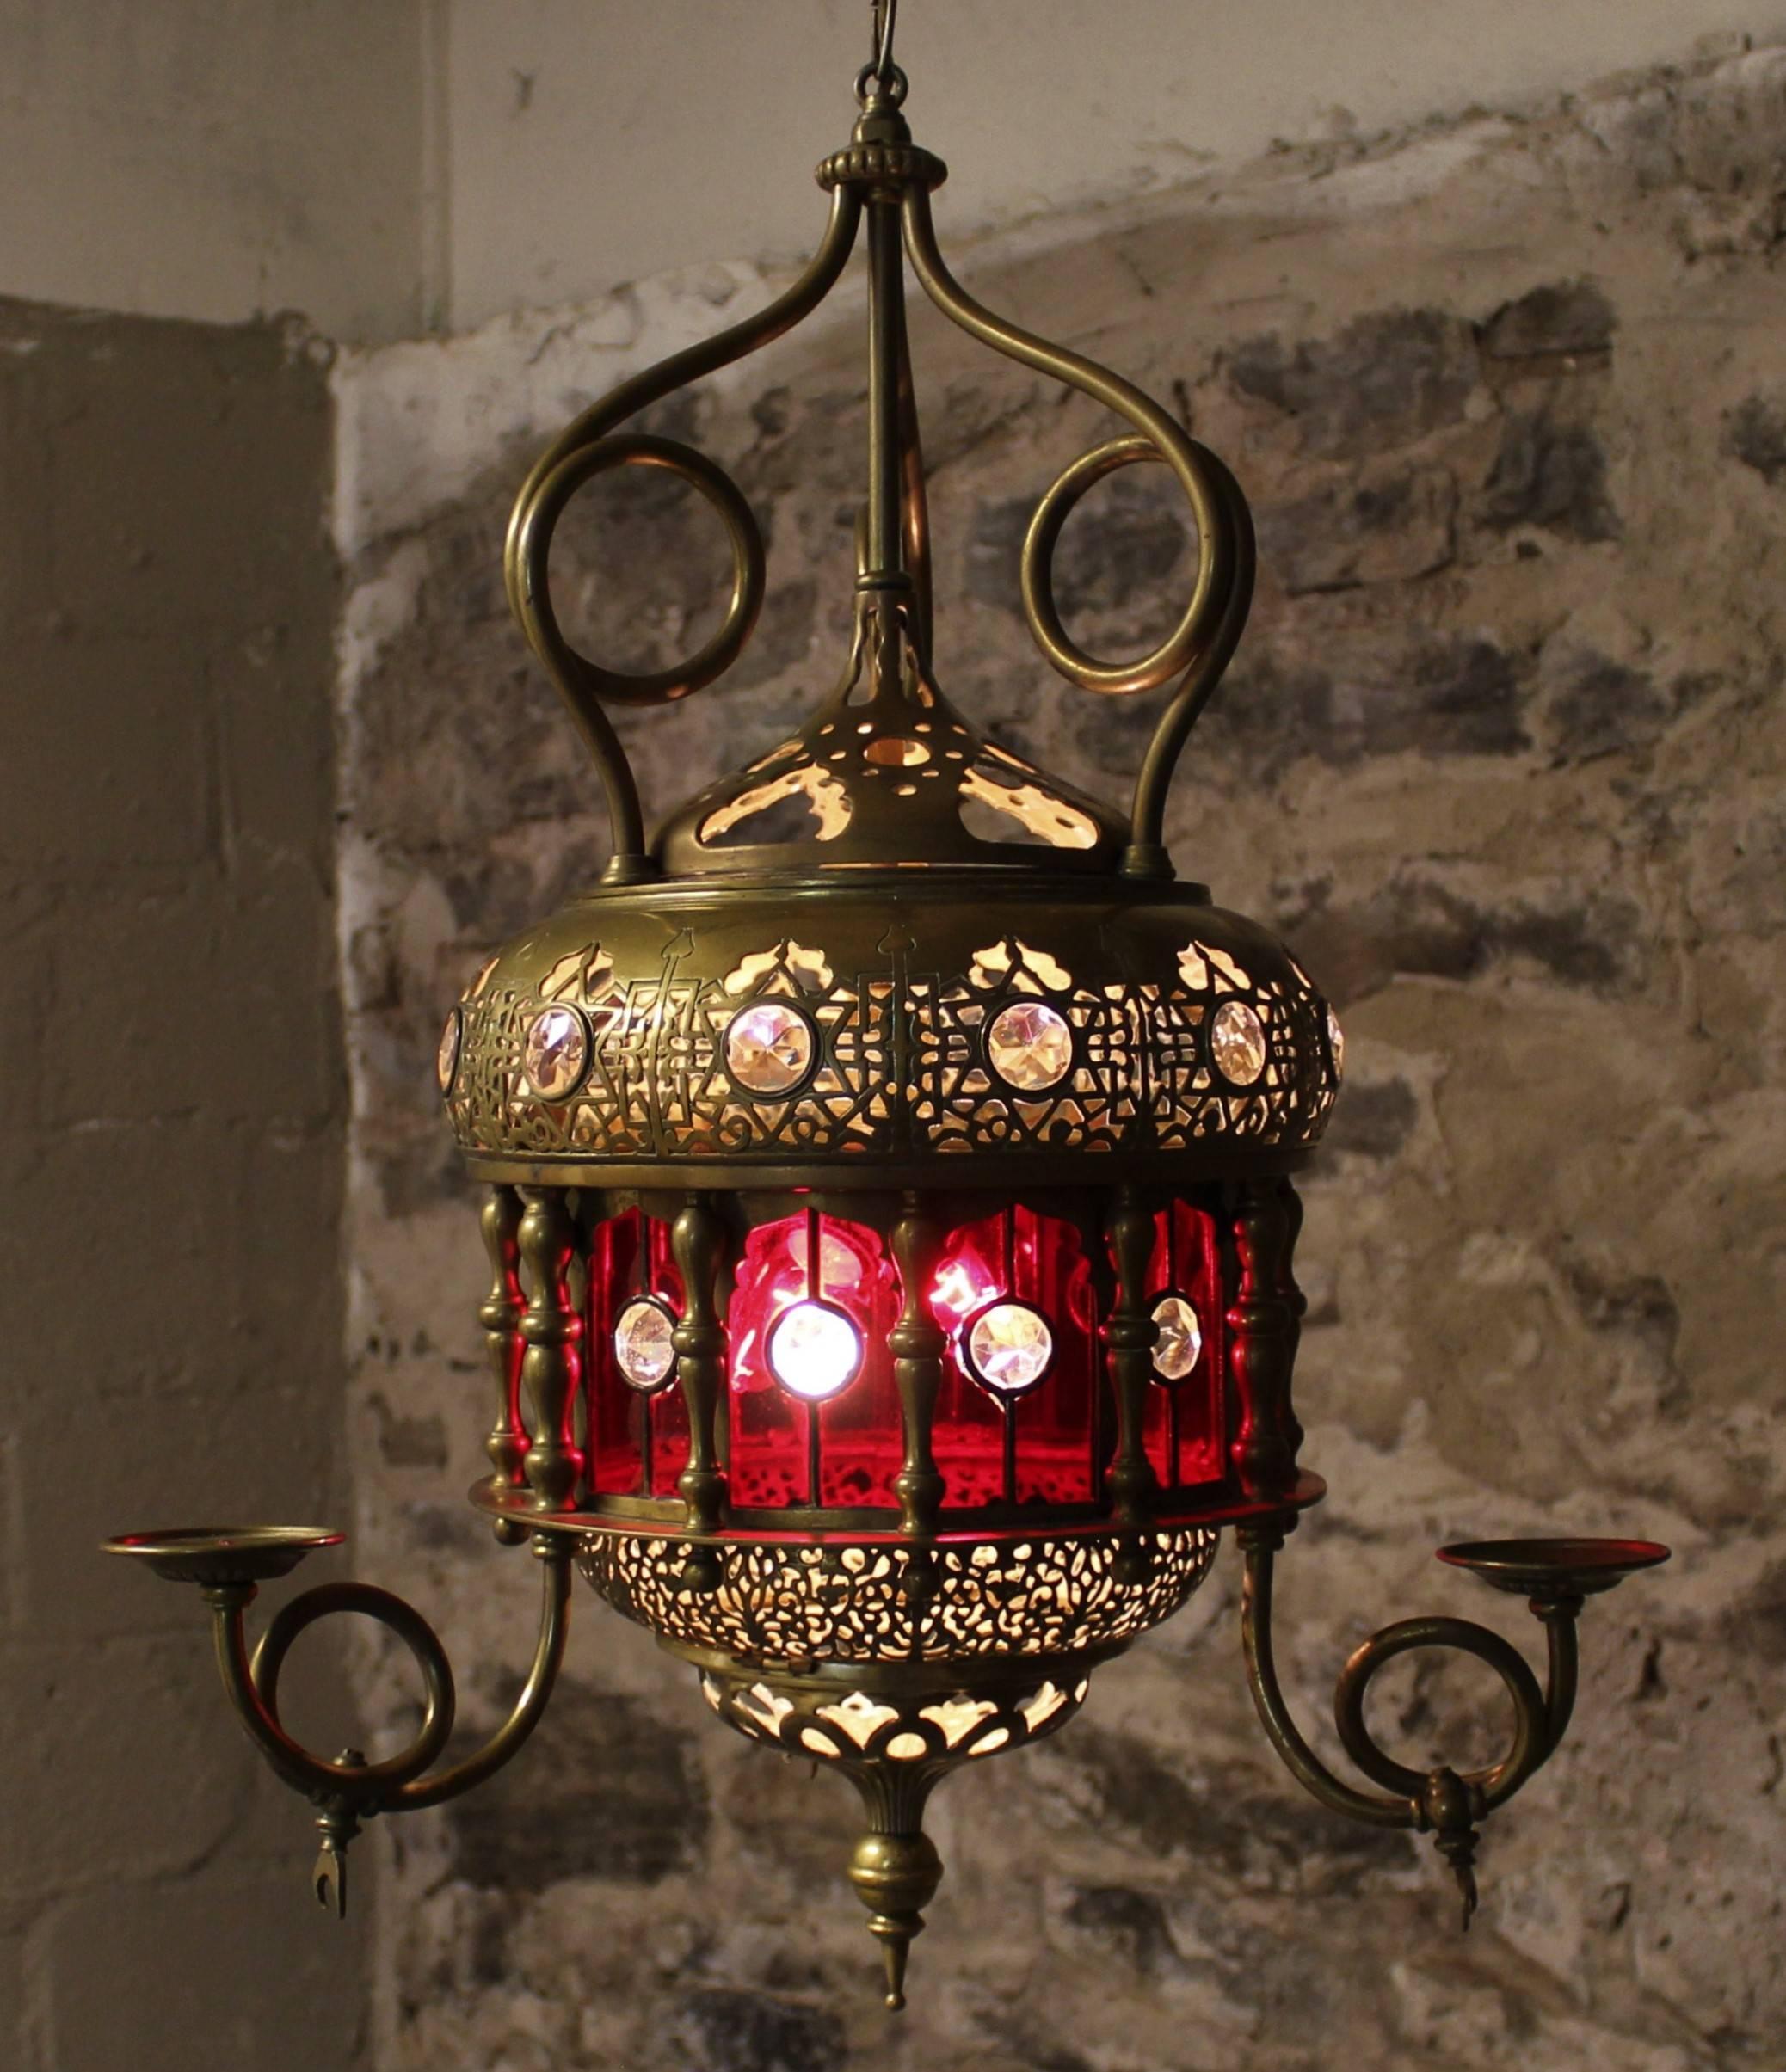 Morroccan lantern with pierced brass and ruby red glass.